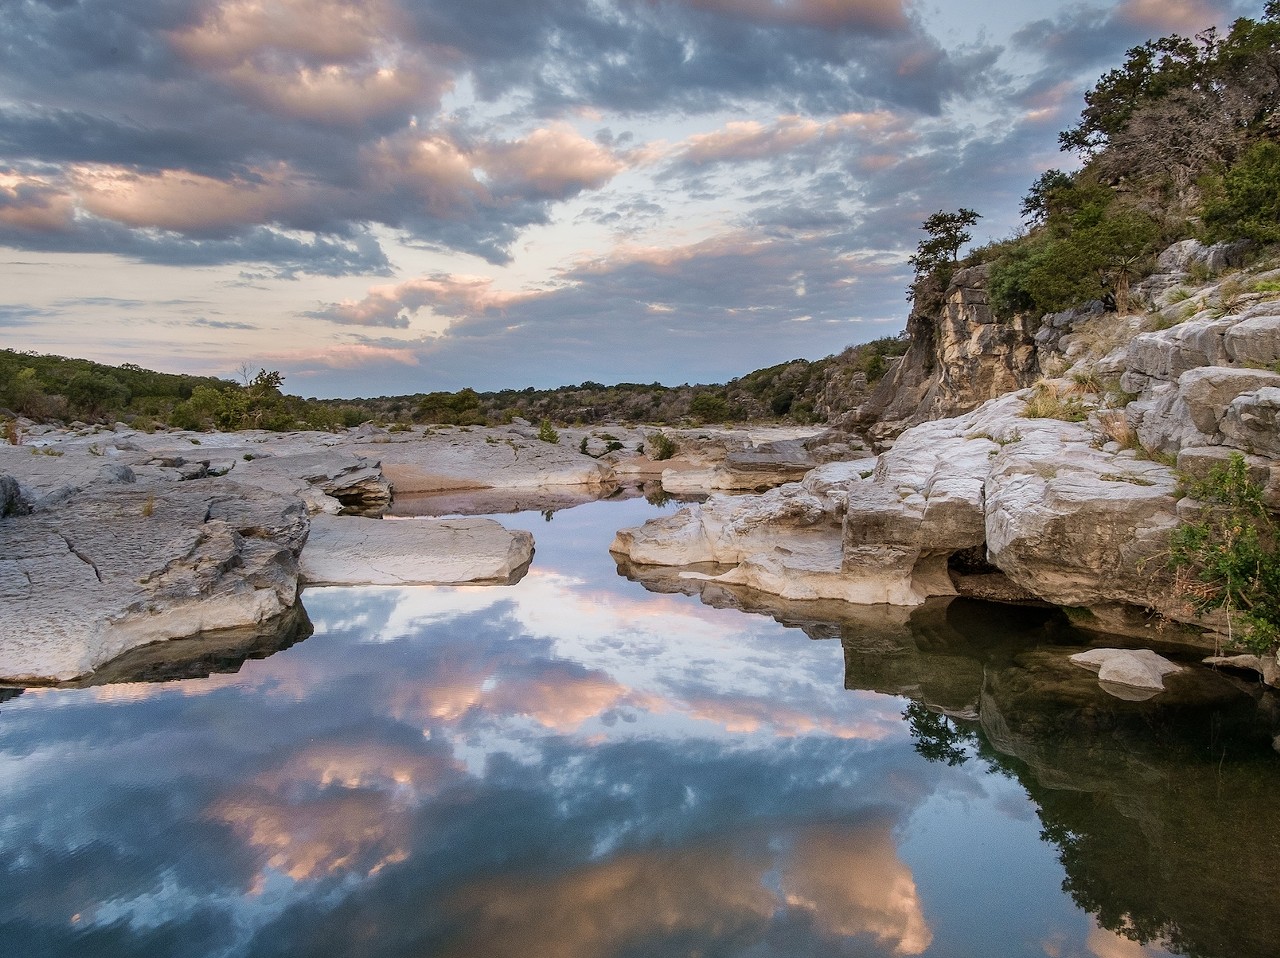 Johnson City
About a 1 hour drive north of San Antonio
Johnson City's Hill Country charm may keep visitors wanting to wine and dine in the town proper, but outdoor enthusiasts know that the feather in its cap is Pedernales Falls State Park, whose 5,000 acres include the picturesque falls which give the park its name. Camping, hiking, swimming and even horseback riding — you can do it all here, with gorgeous Texas scenery as your backdrop.